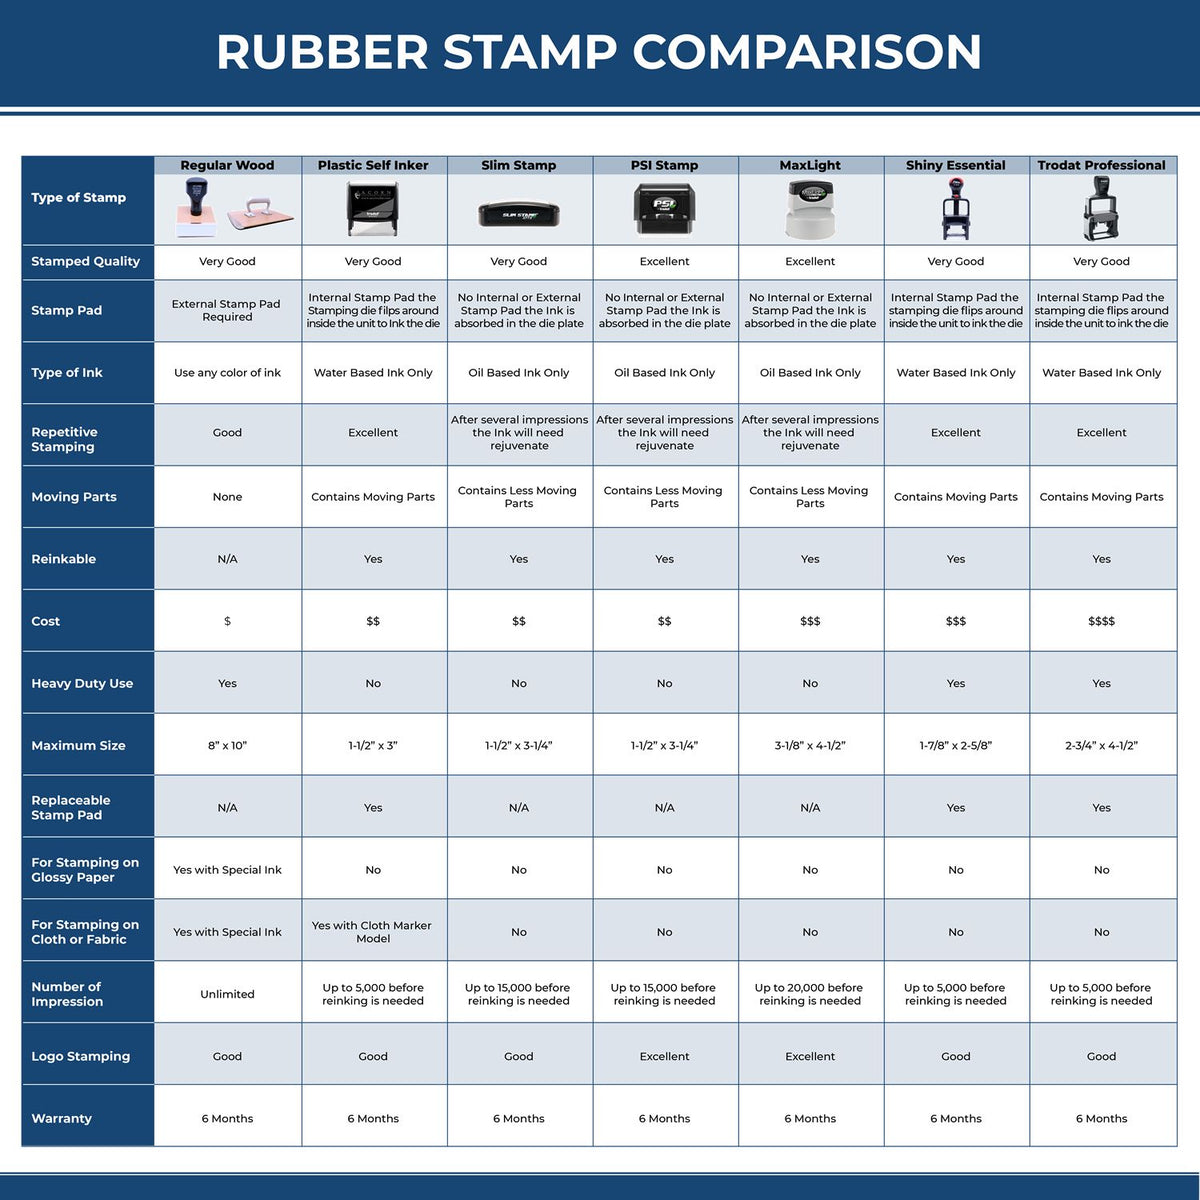 Large Self-Inking Courtesy Copy Original Filed Electronically Stamp 4853S Rubber Stamp Comparison